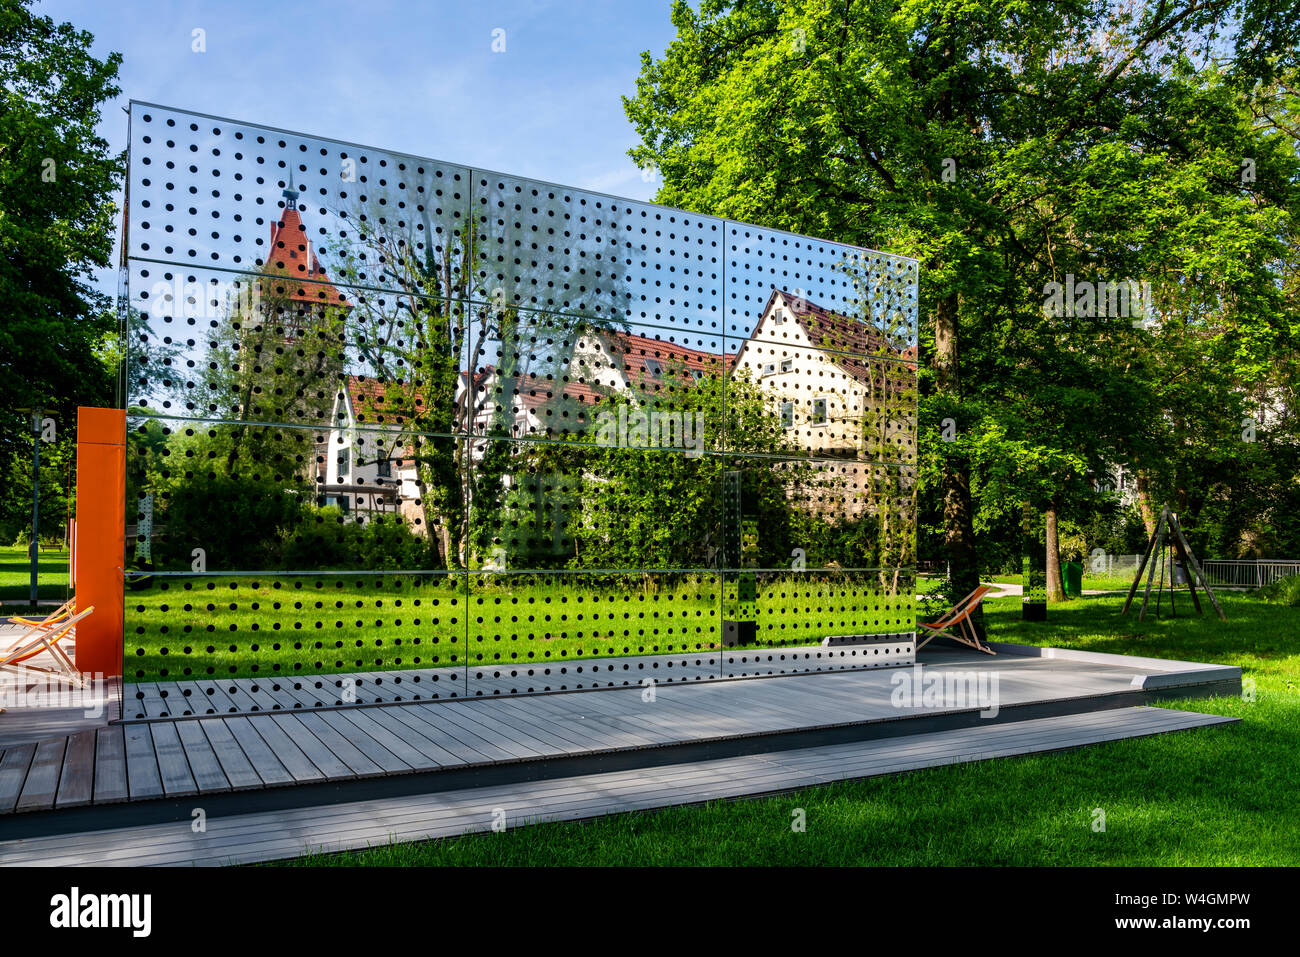 Reflection of the old town, Waiblingen, Germany Stock Photo